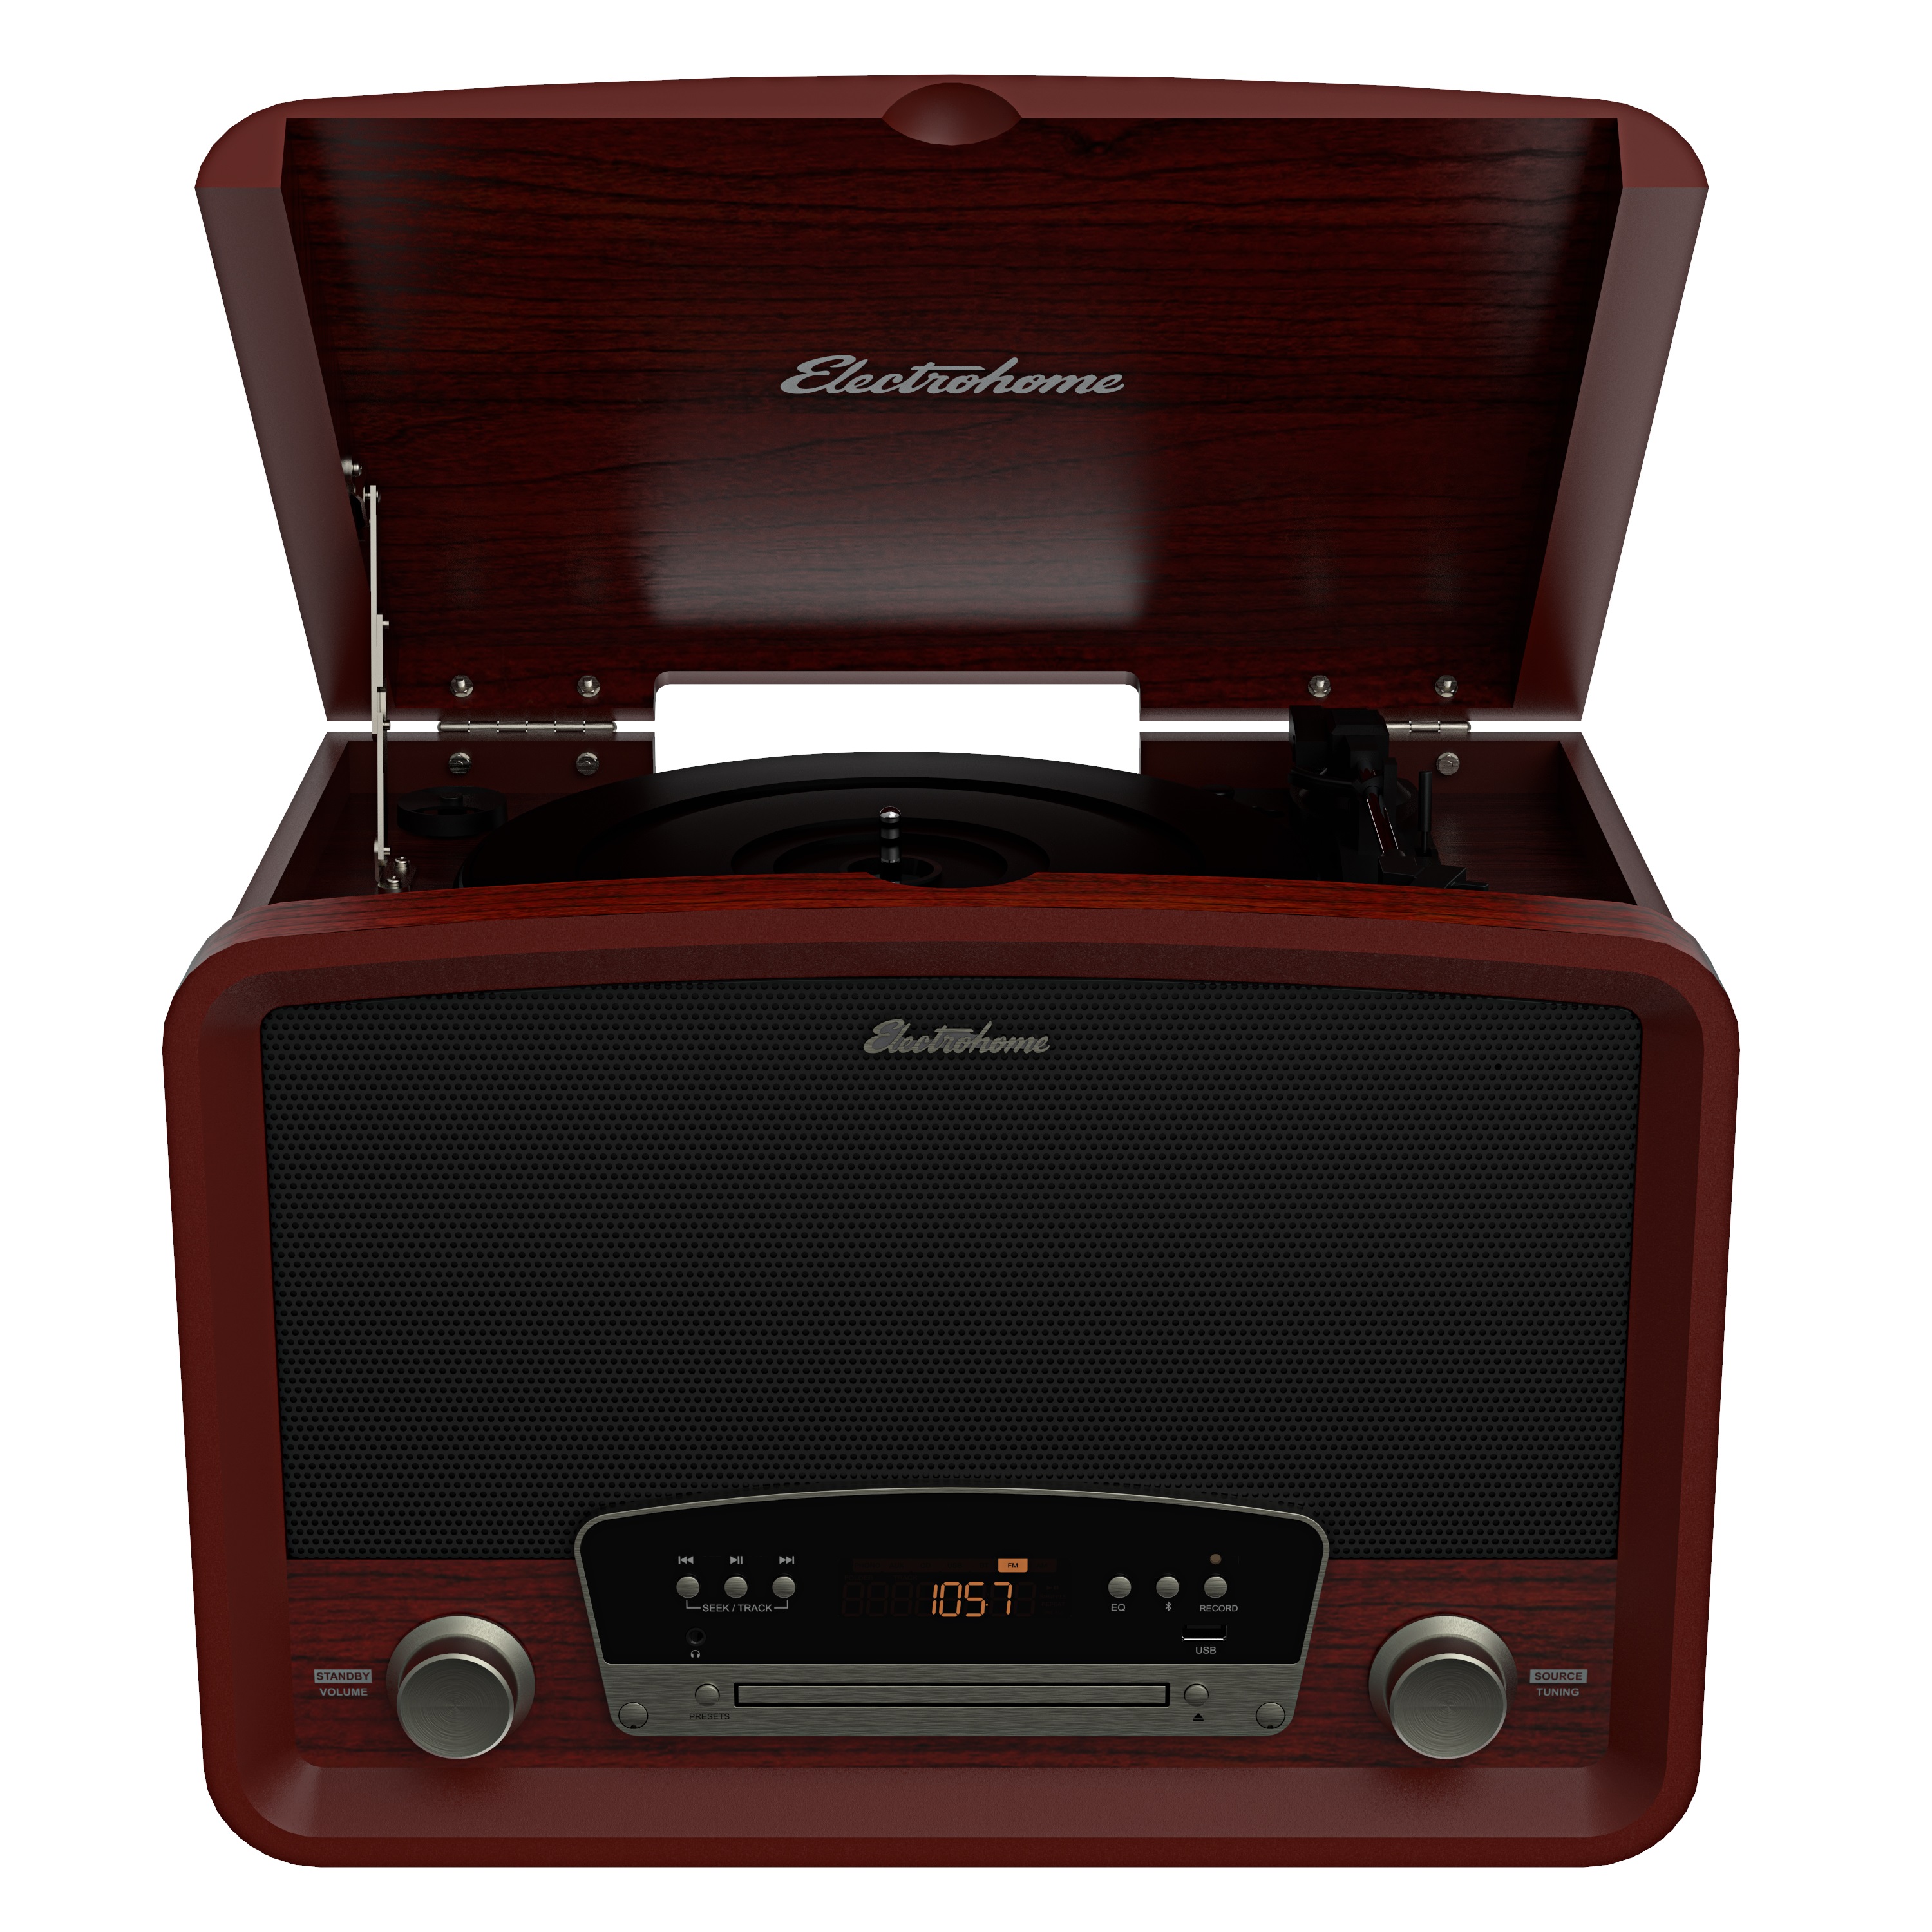 Electrohome Vinyl Record Player - 1 Year Extended Warranty - image 2 of 6